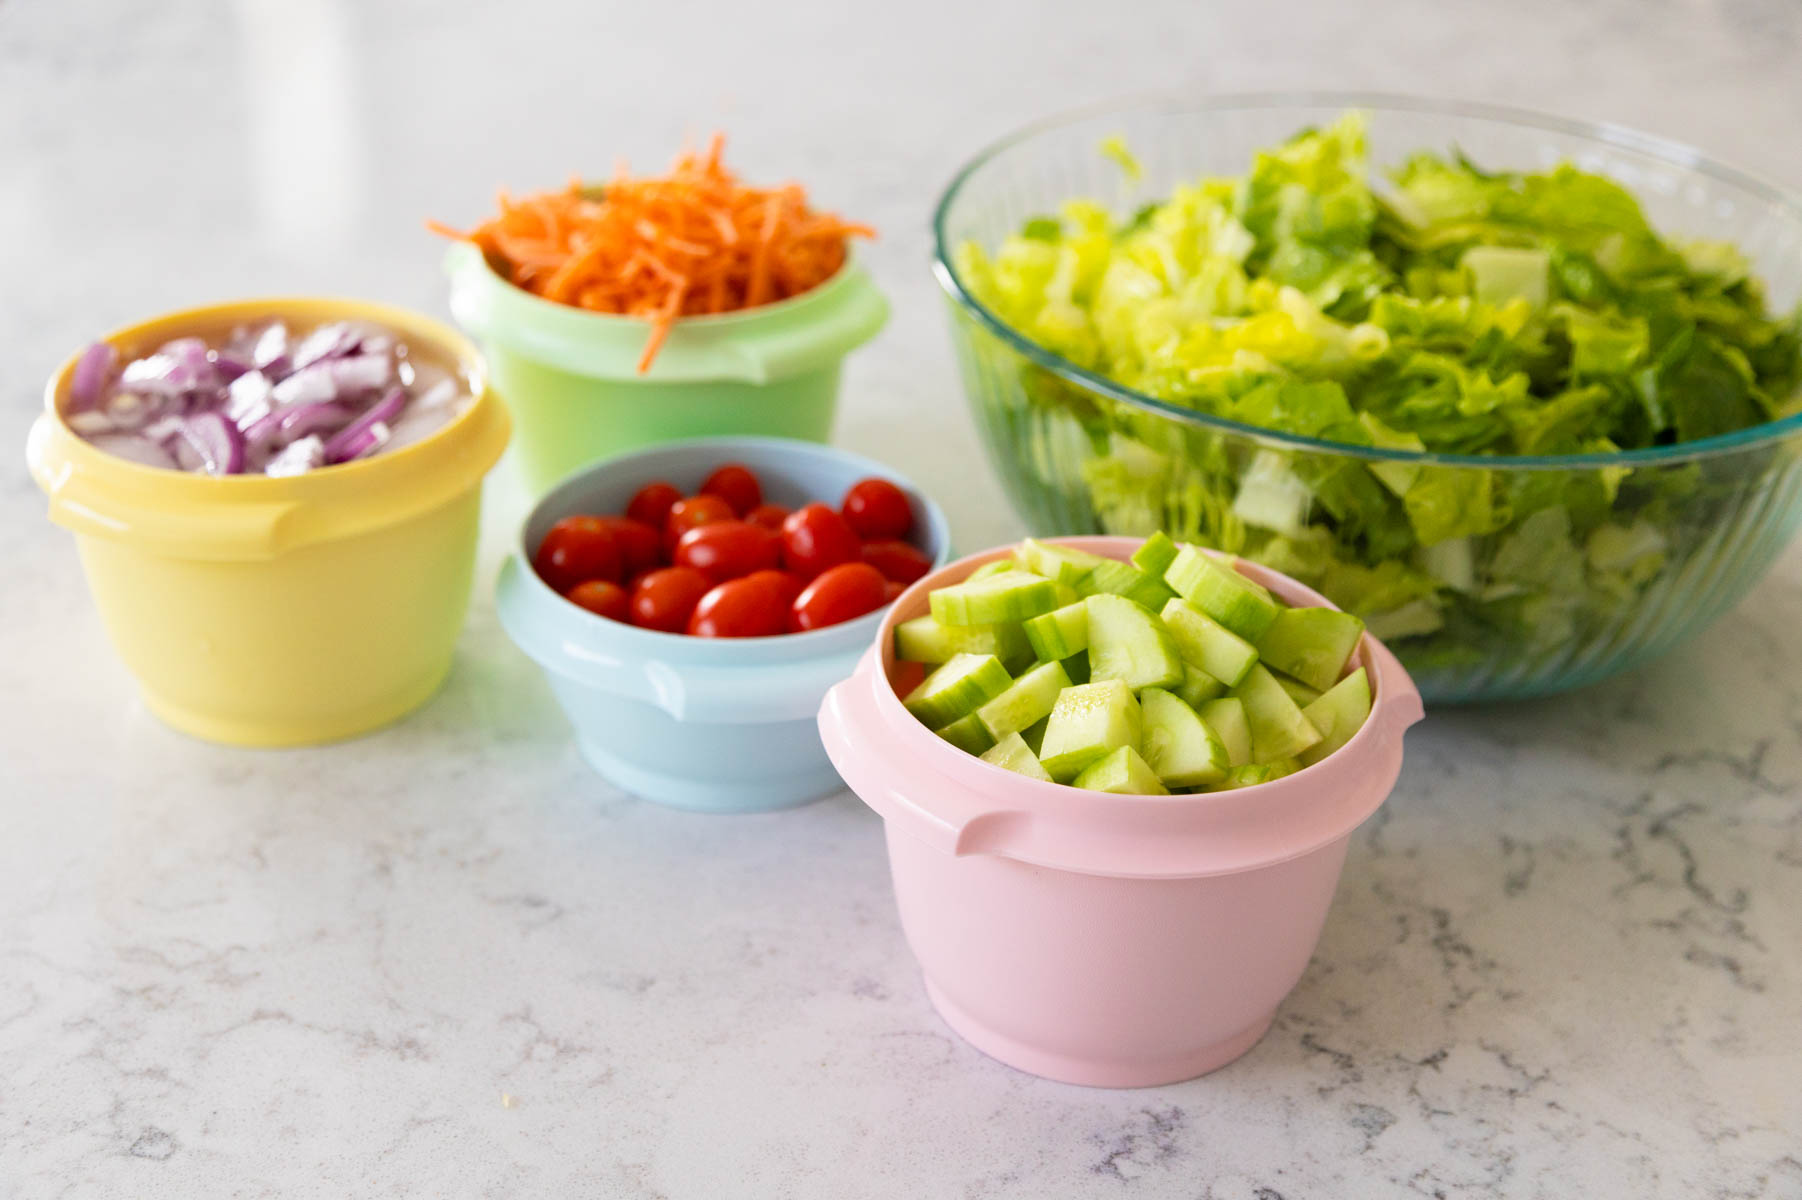 The ingredients to make a fresh garden salad are served salad bar style on the kitchen counter so everyone can build their own salad.